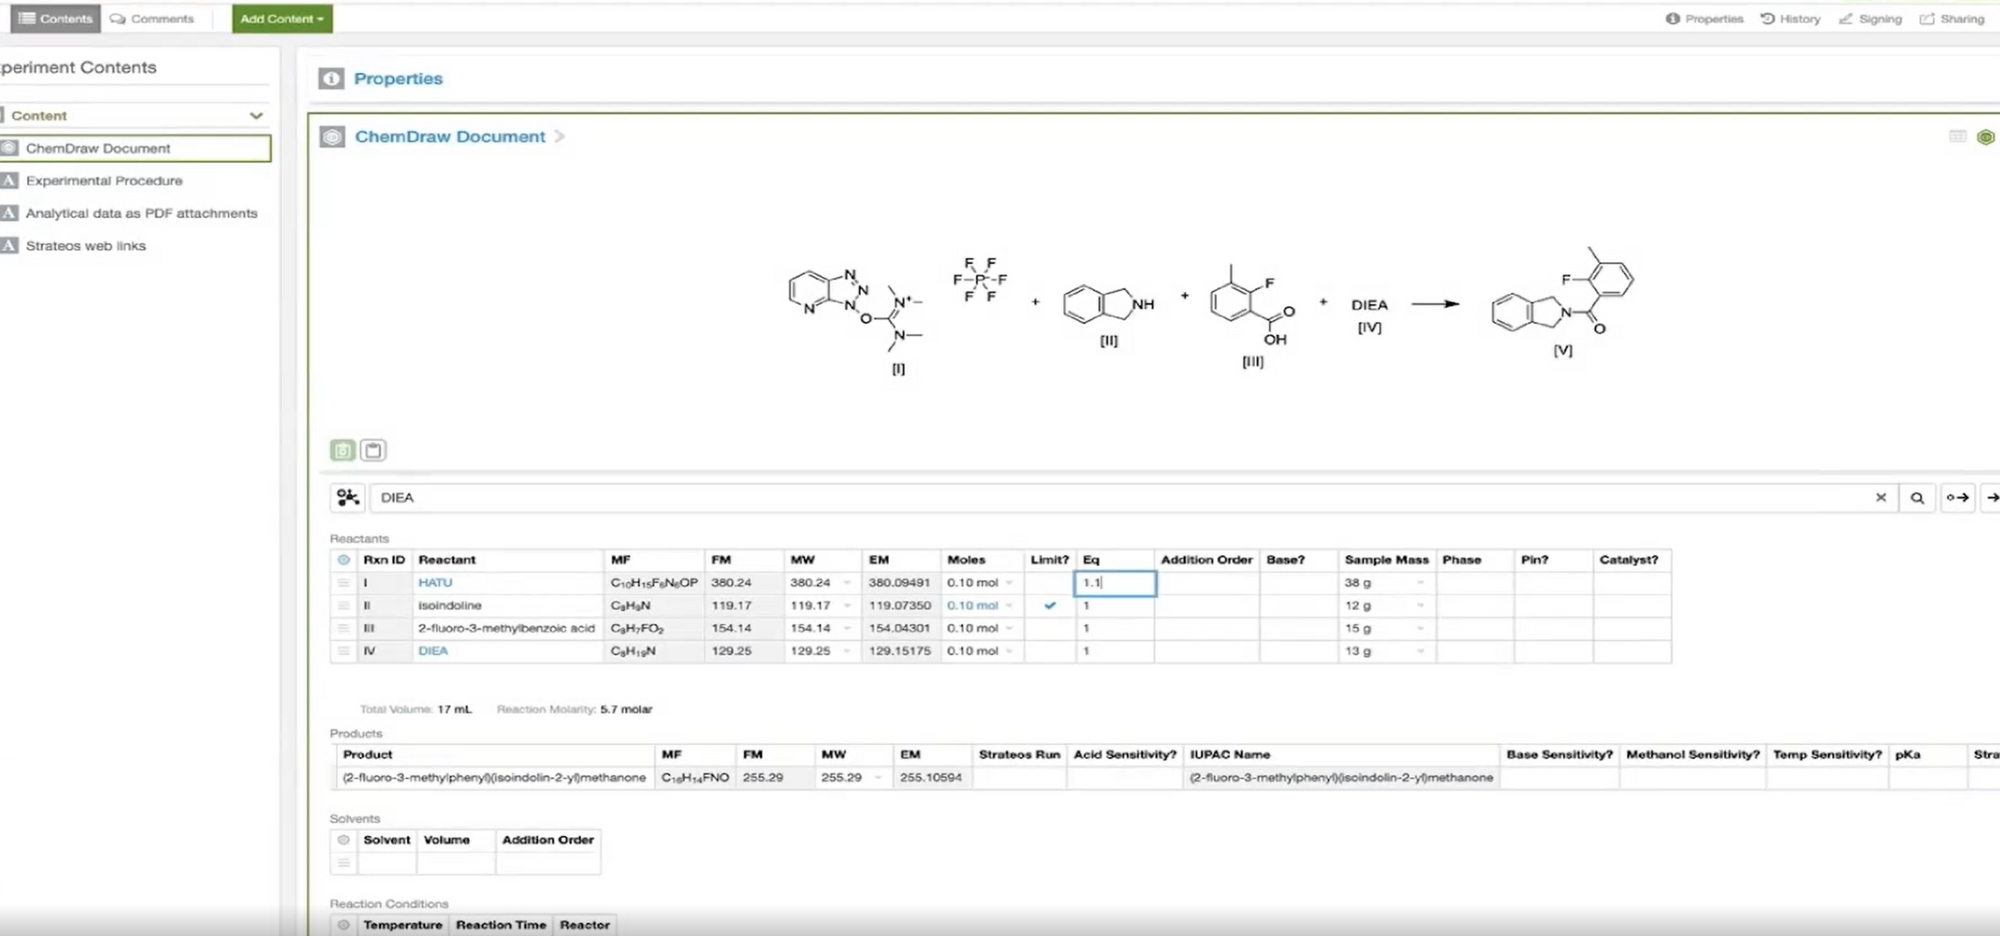 Part 2 Chemistry Webinar Series: Remote Access Robotic Controlled Compound Synthesis - Recap